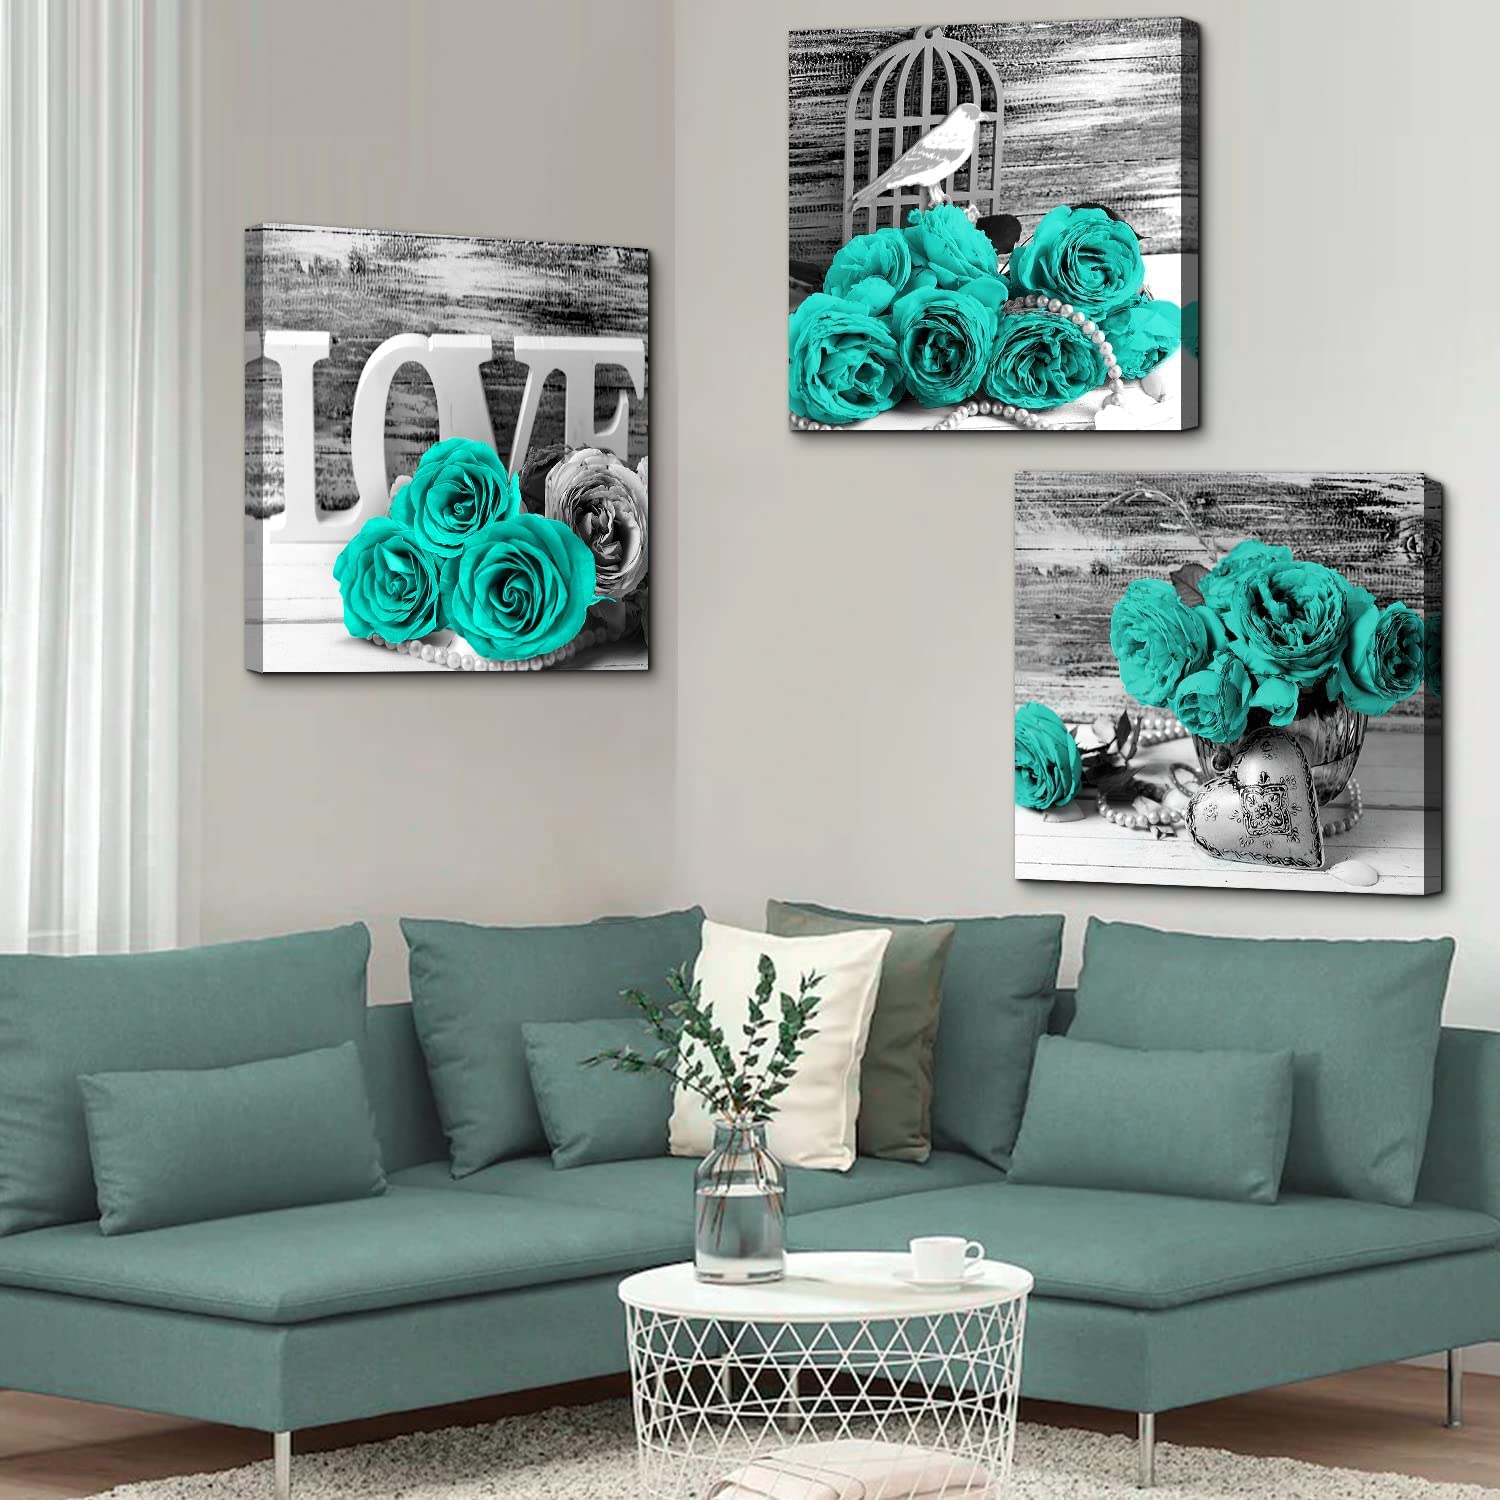 Teal Floral Wall Art for Bedroom Turquoise Rose Wall Decor Black and White Canvas  Prints 20 x 20